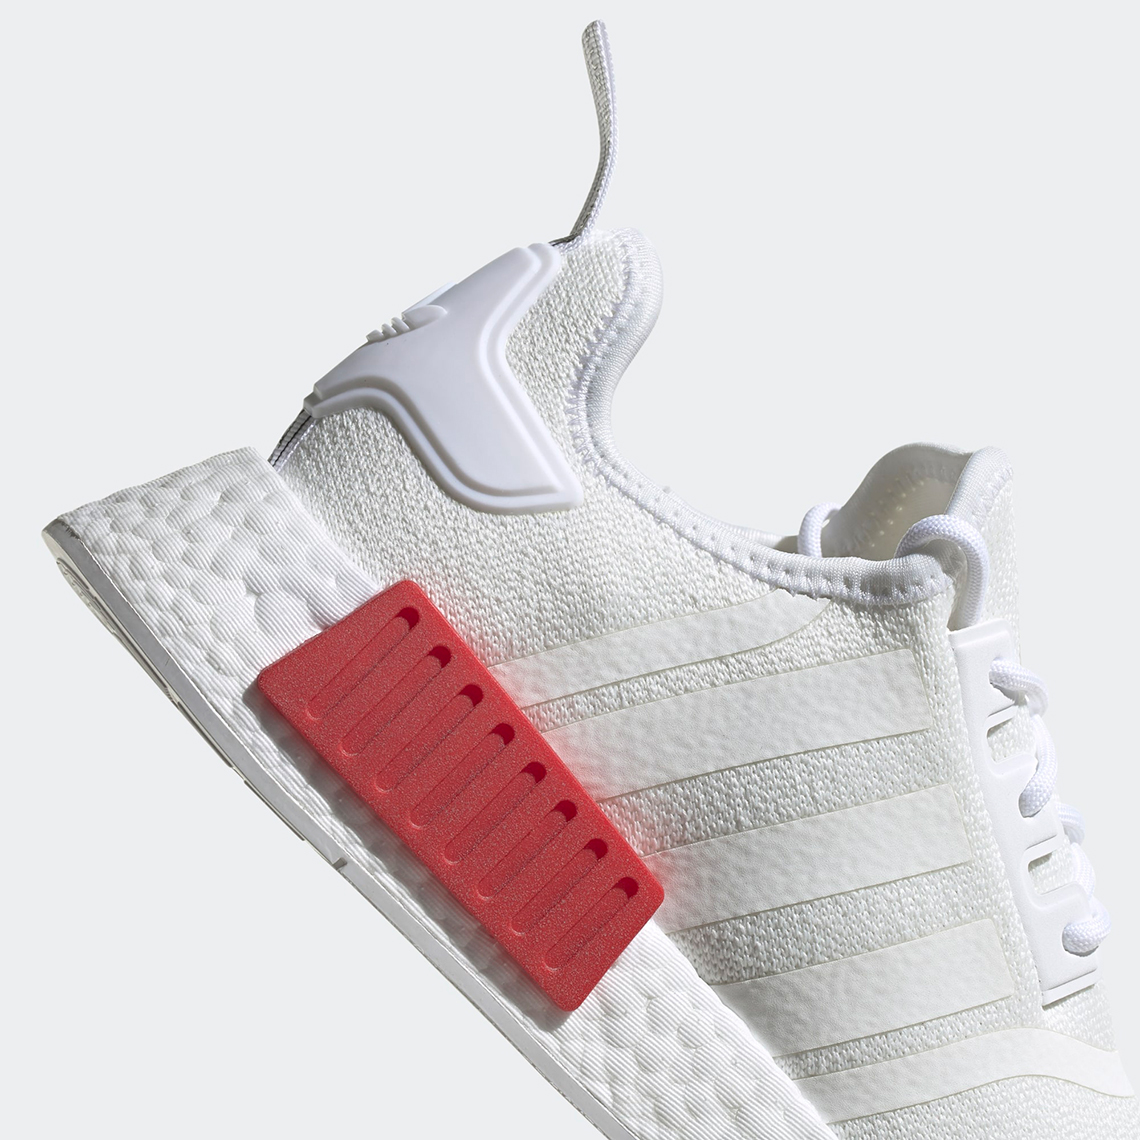 adidas NMD R1 GZ7925 Release Date